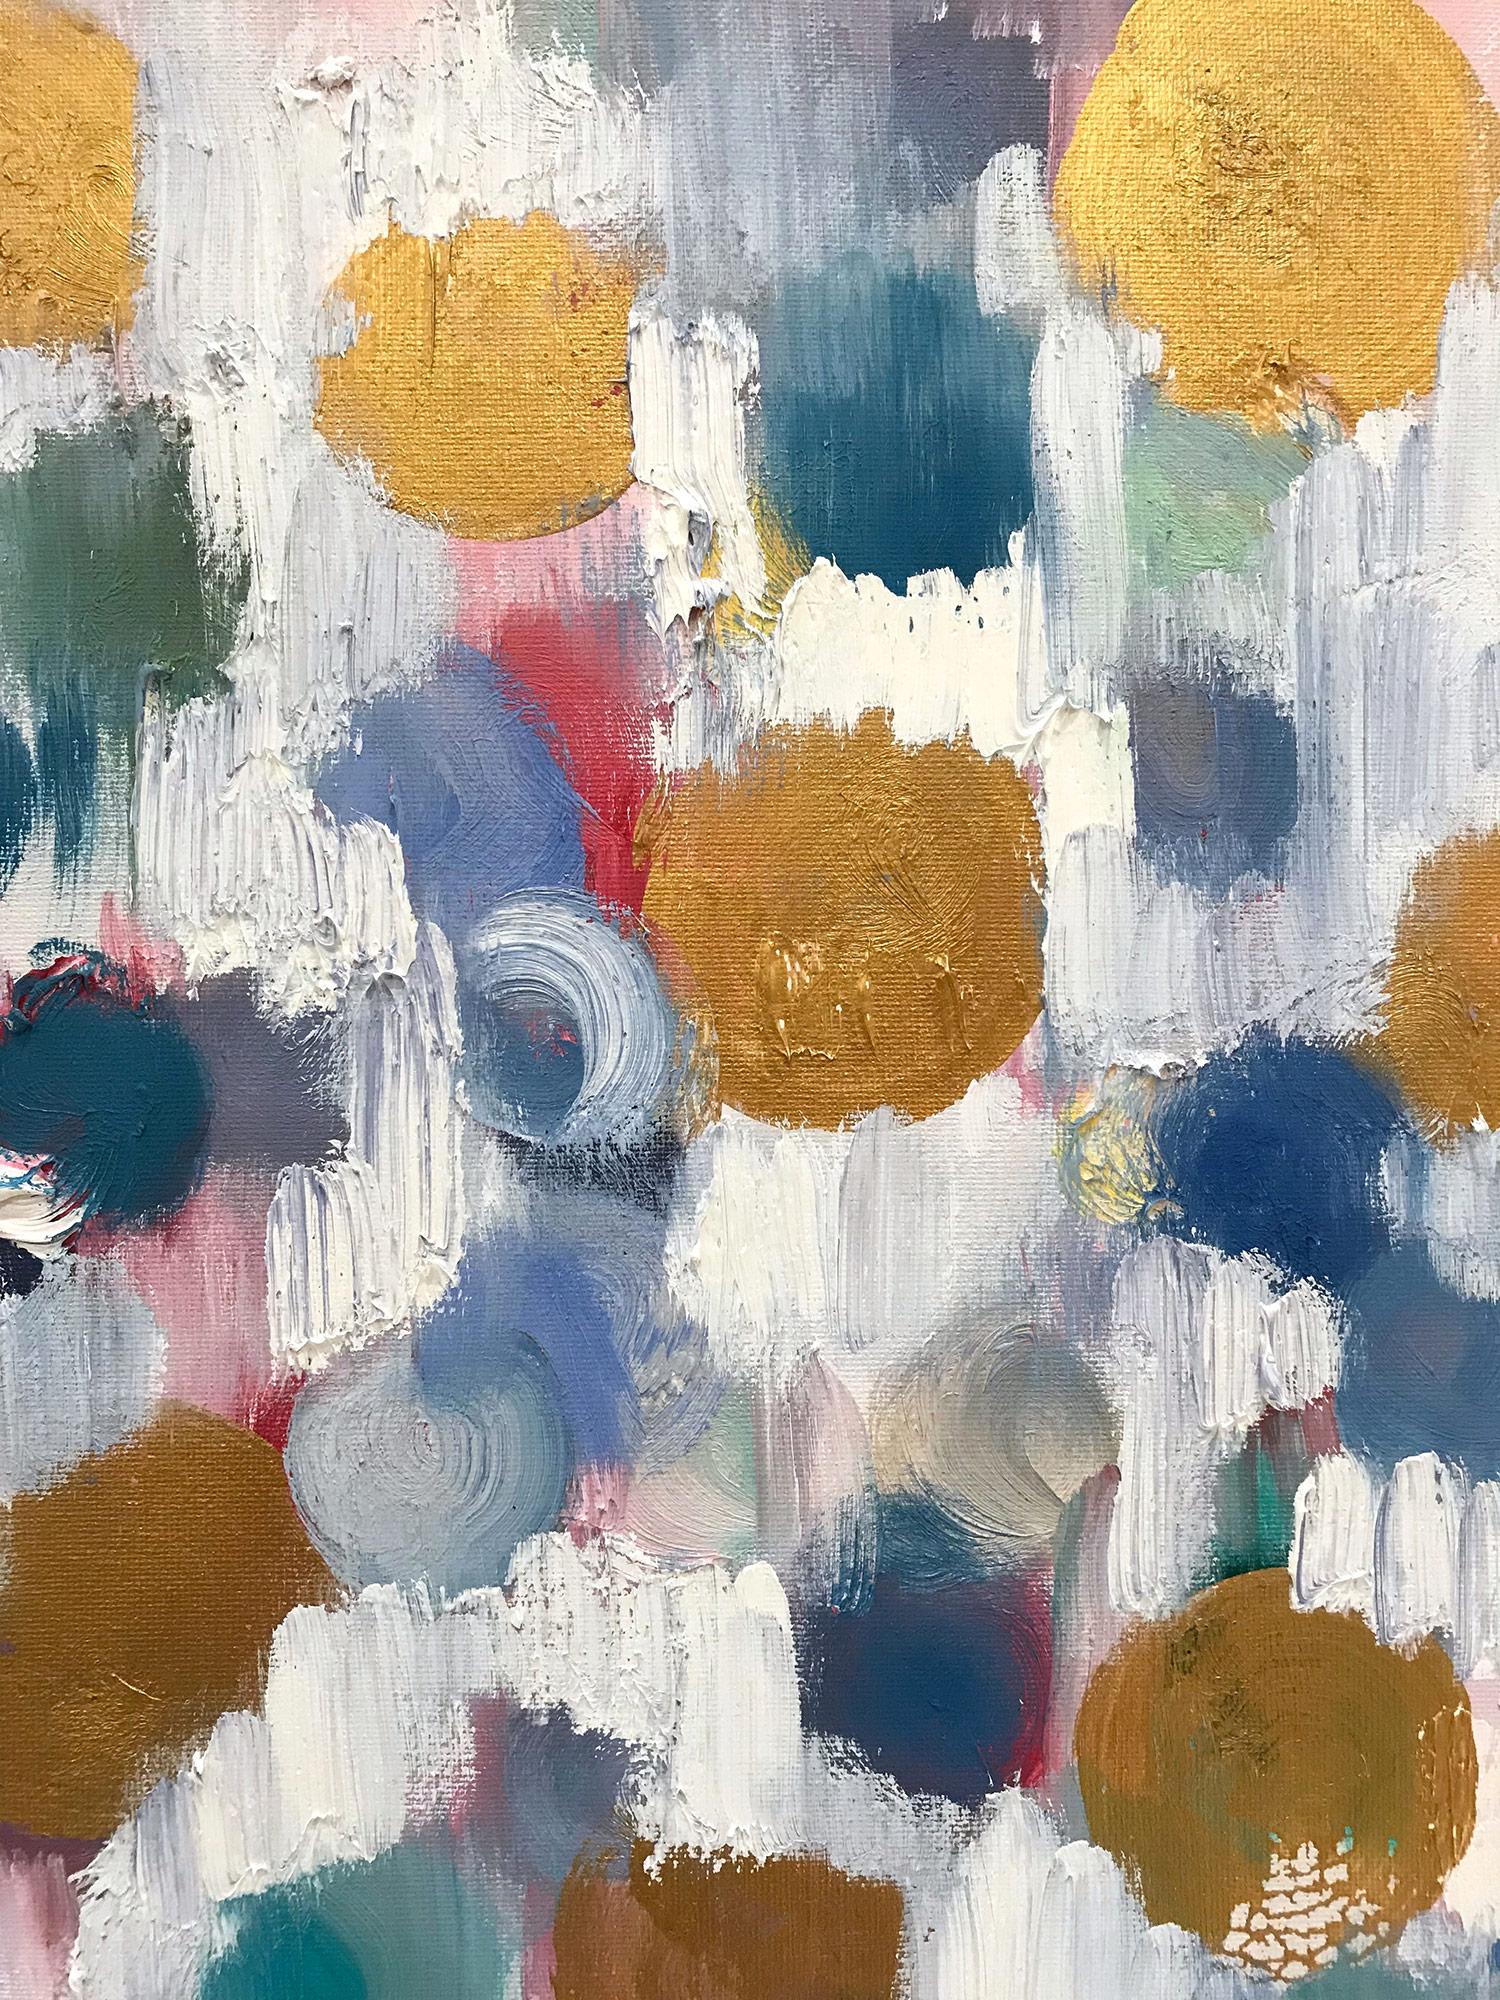 With layers of bright oils and whisking brush strokes, the paint is able to shine and shimmer in a very unique pattern. This painting is from Shaoul's more modern collective works with a very decorative contemporary style. The way the paint blends